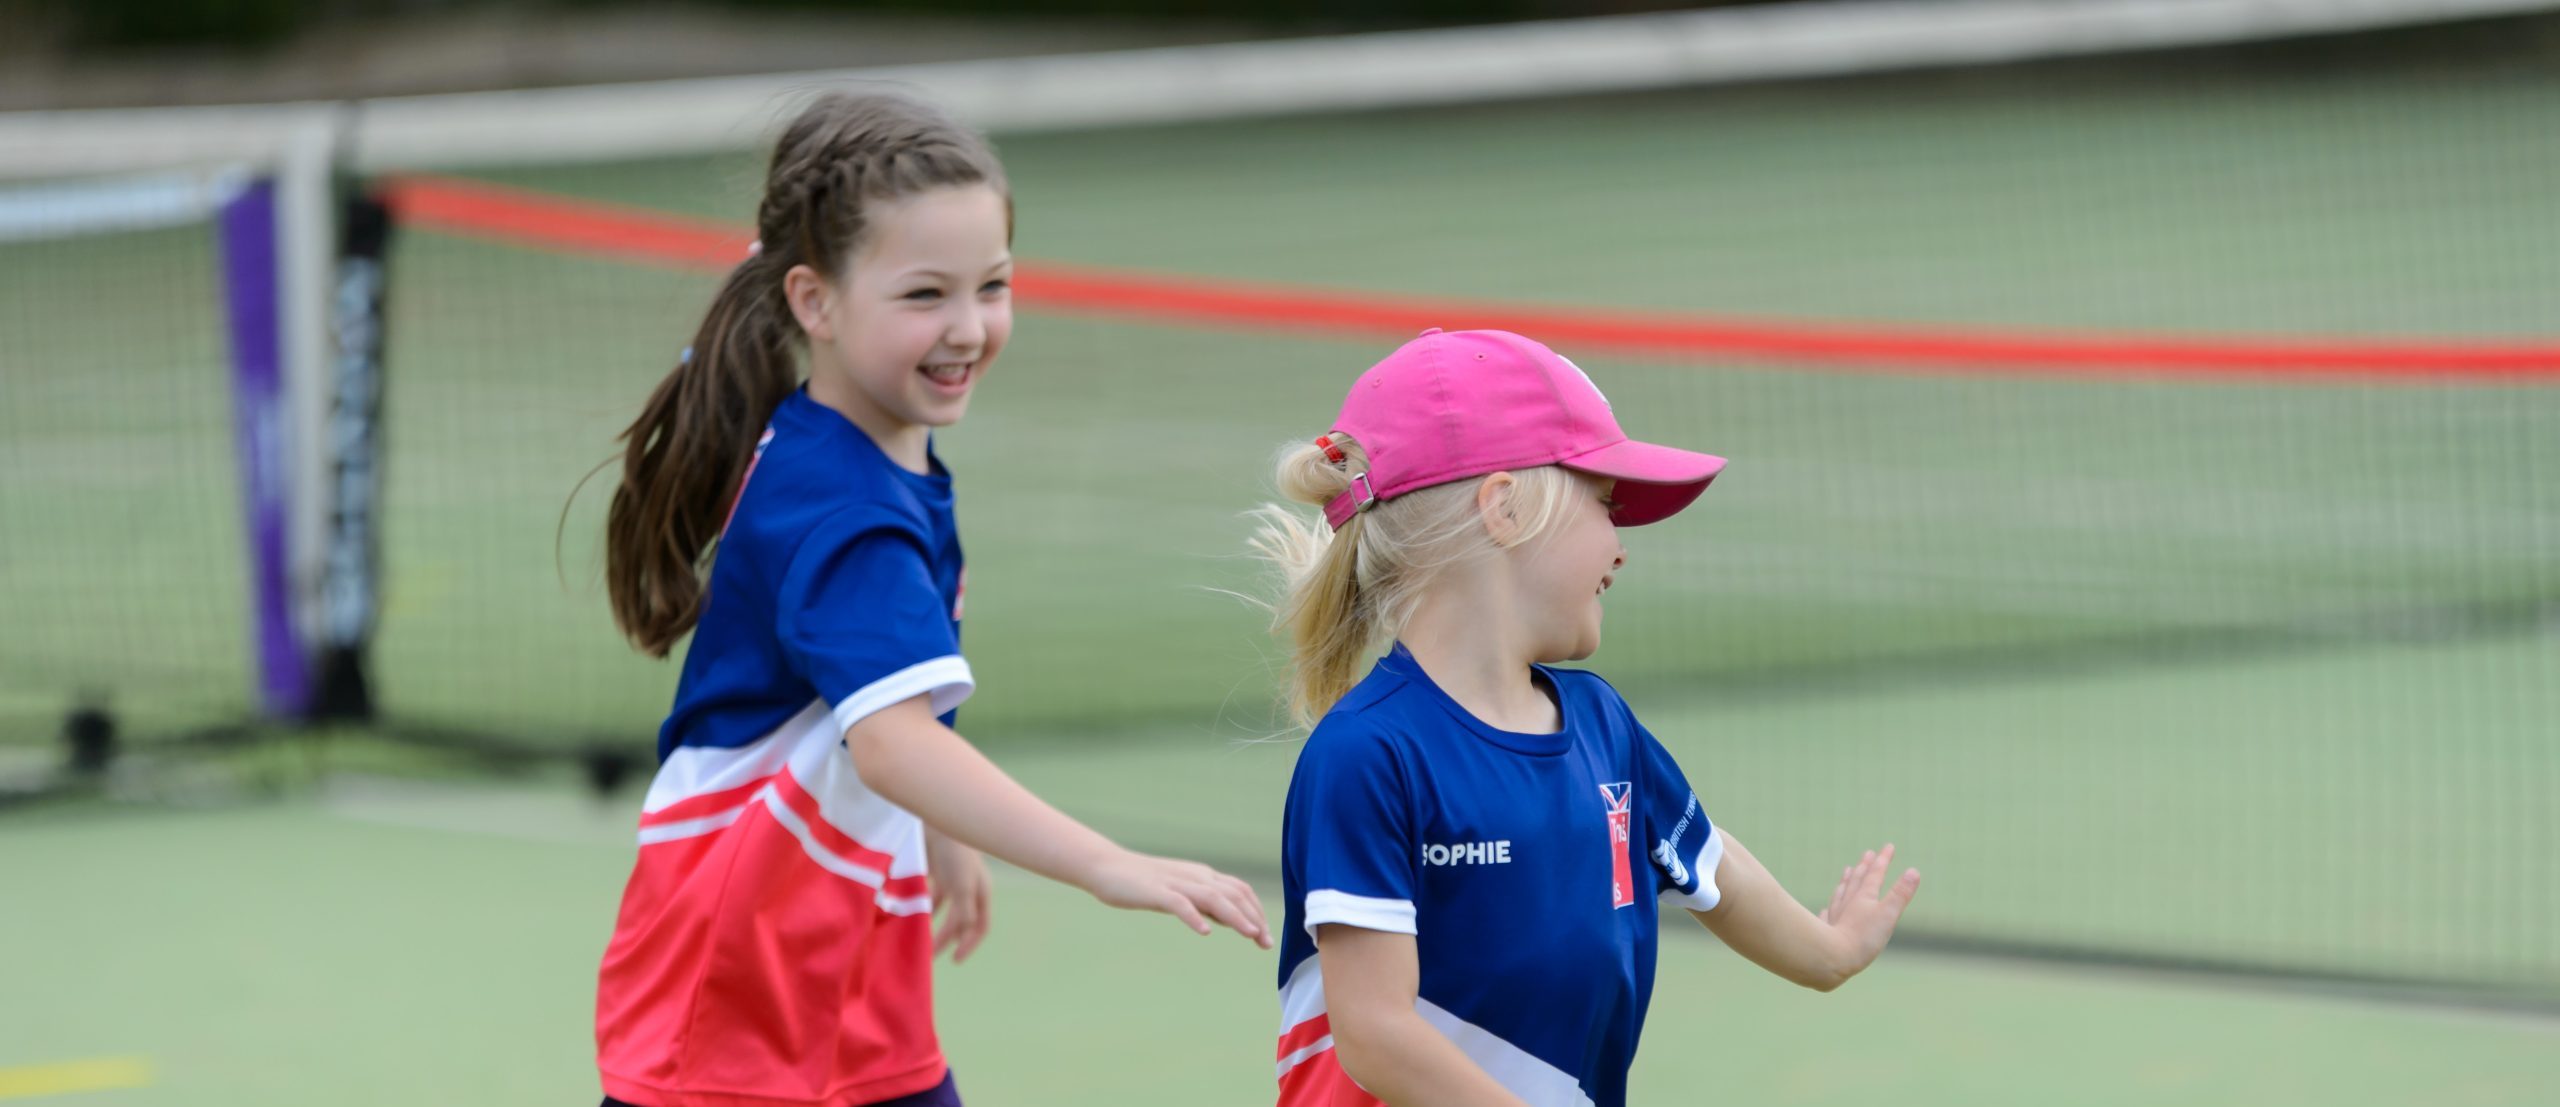 Two primary school girls running on a tennis court